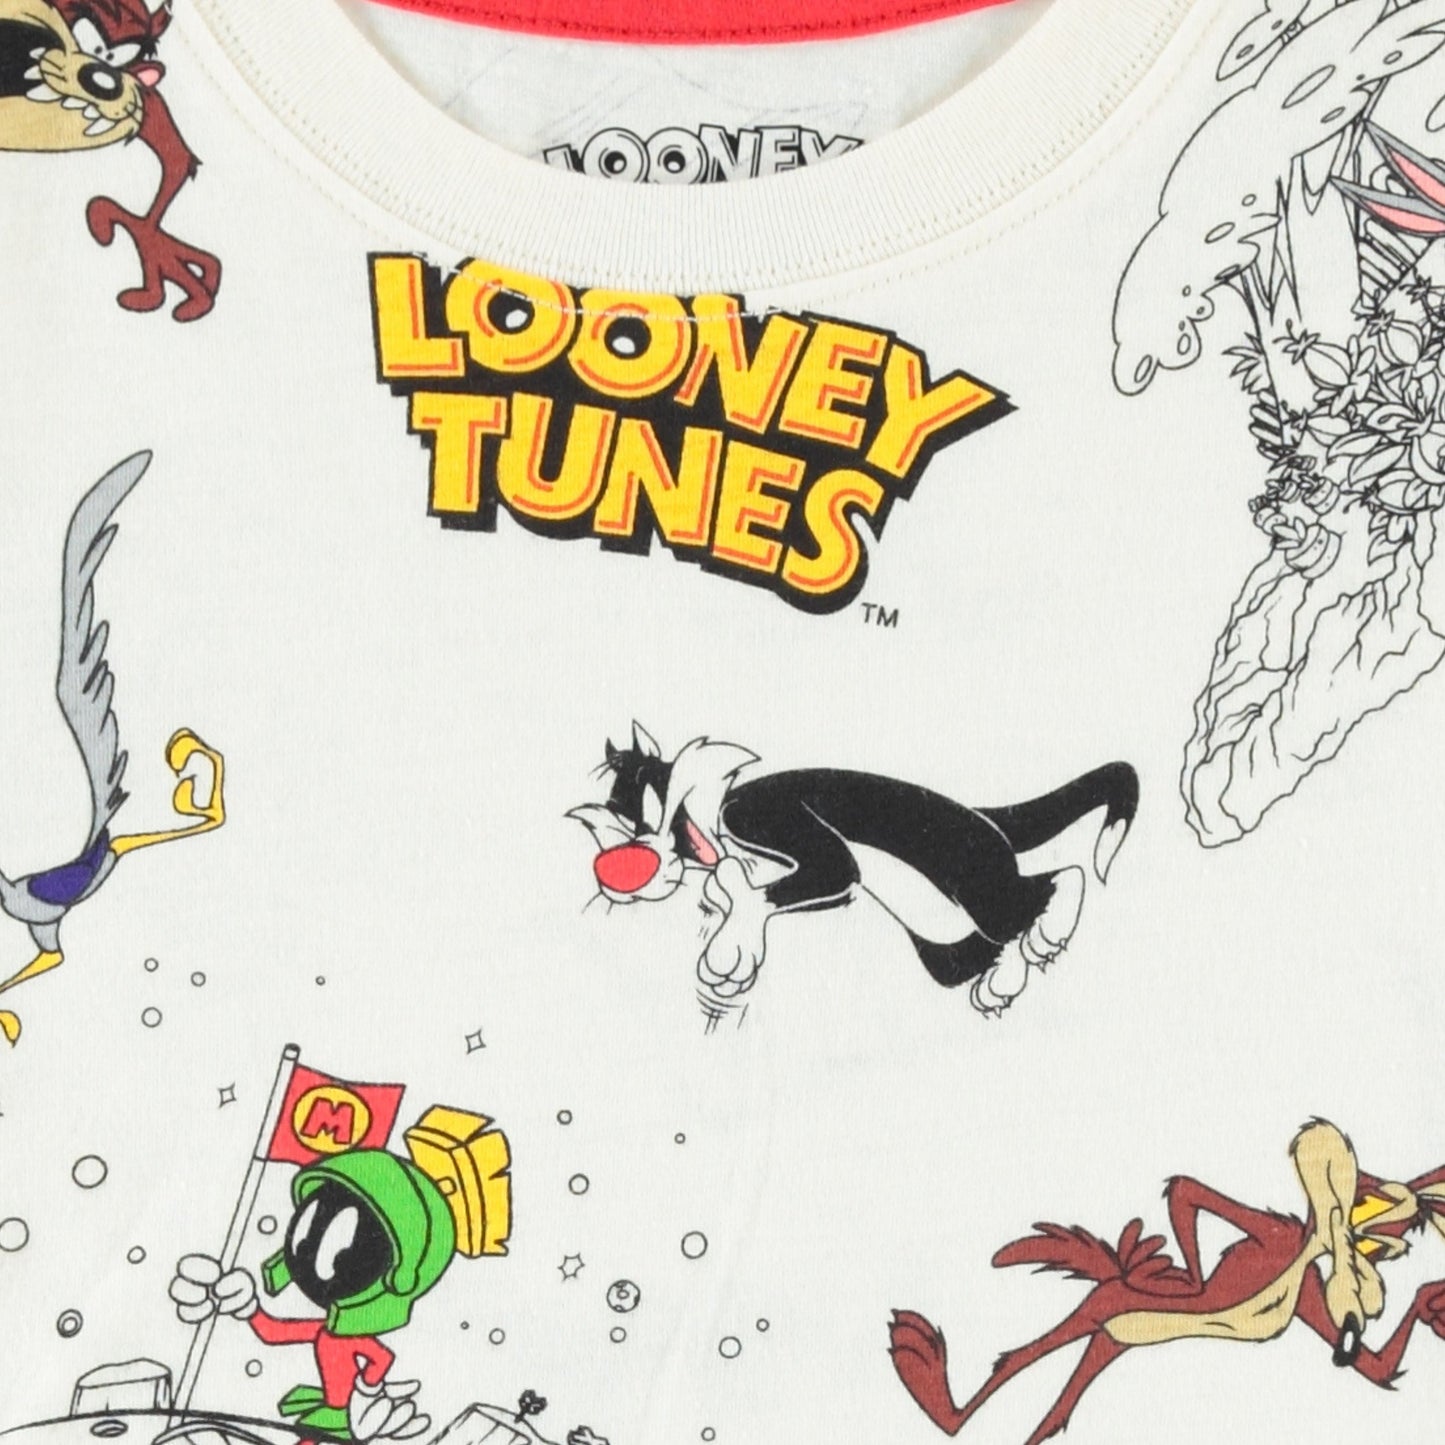 Looney Tunes Boys Short Sleeve T-Shirt - All Over Print T-Shirt Bugs Bunny, Taz, Daffy Duck and Friends